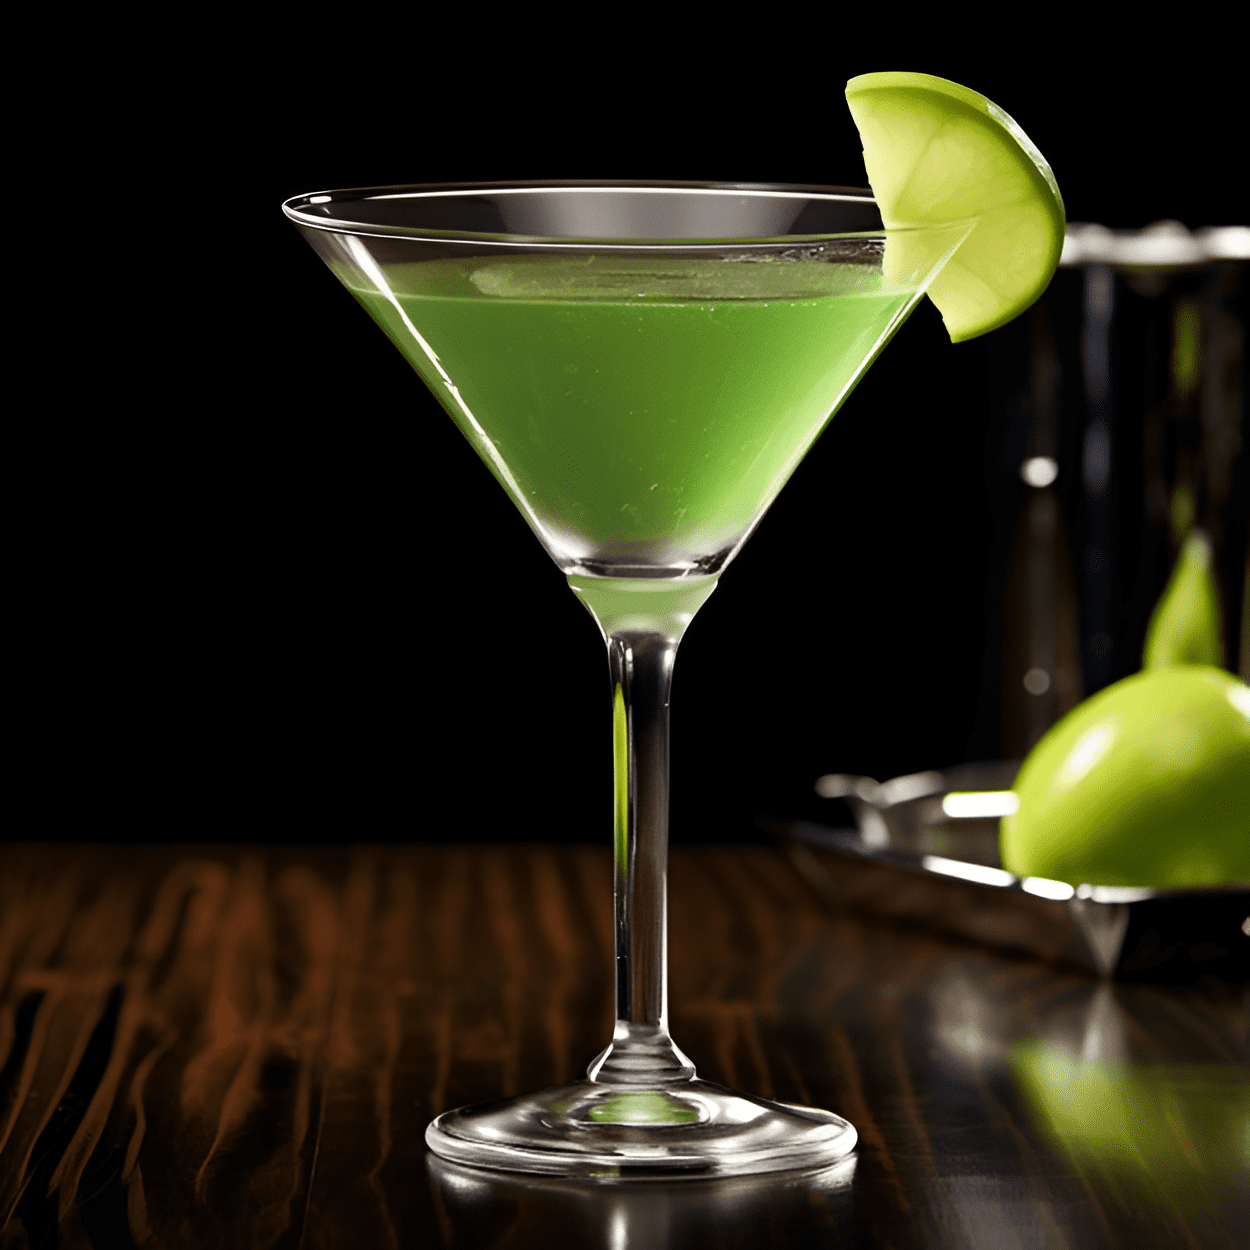 Apple Martini Cocktail Recipe - The Apple Martini has a sweet and sour taste, with a crisp and refreshing apple flavor. It is well-balanced, with a slight tartness from the apple and a smooth, velvety finish from the vodka.